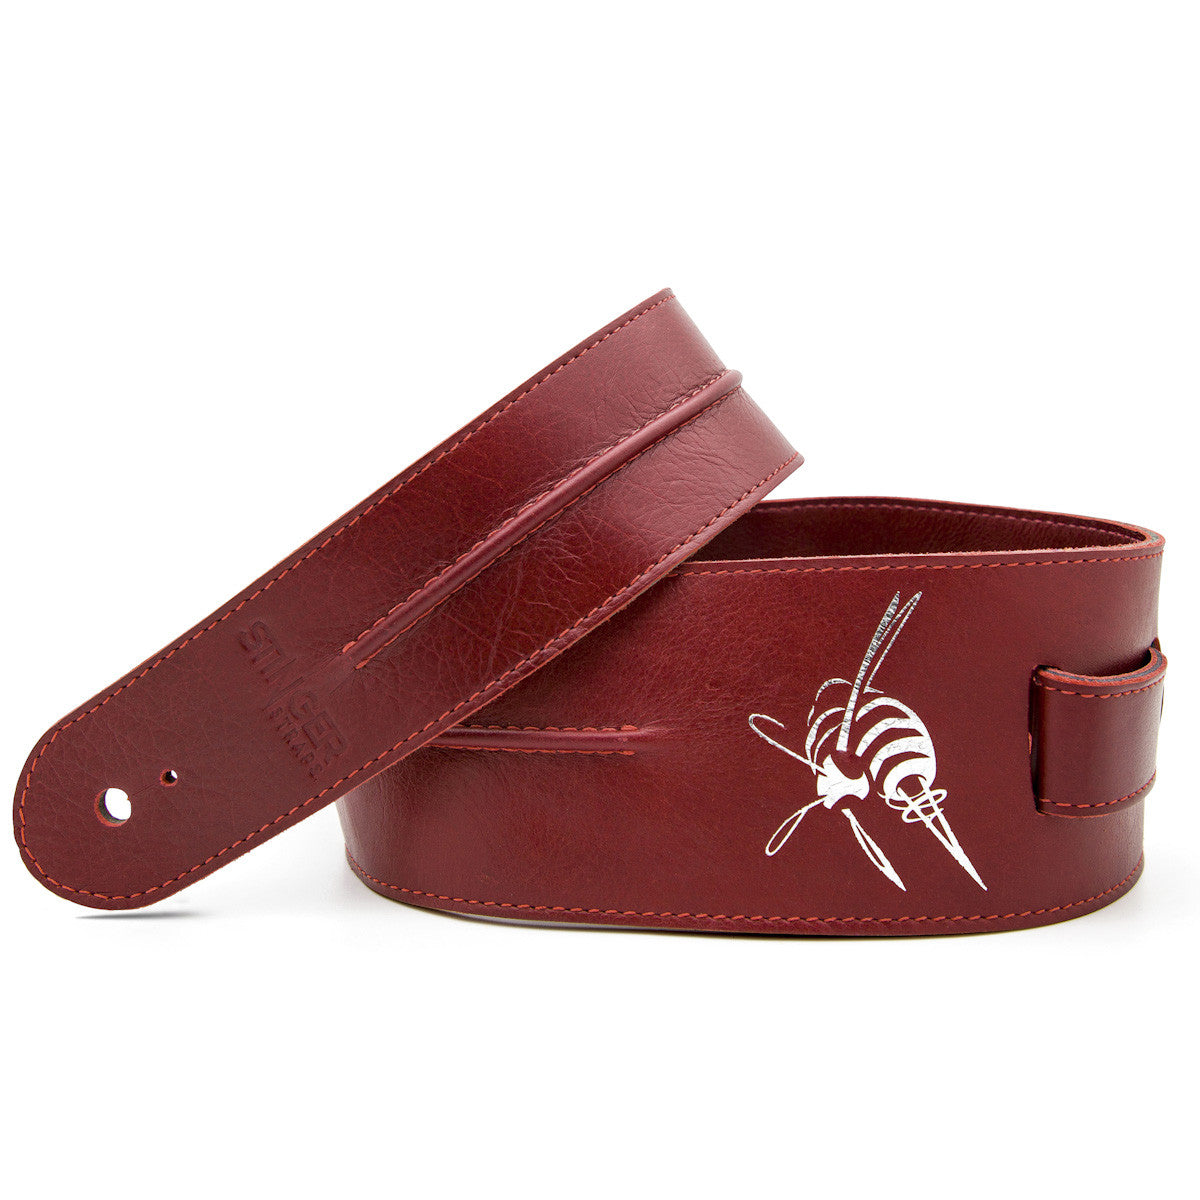 Red Leather Guitar Strap | Handmade in Montreal, Canada - Stinger Straps